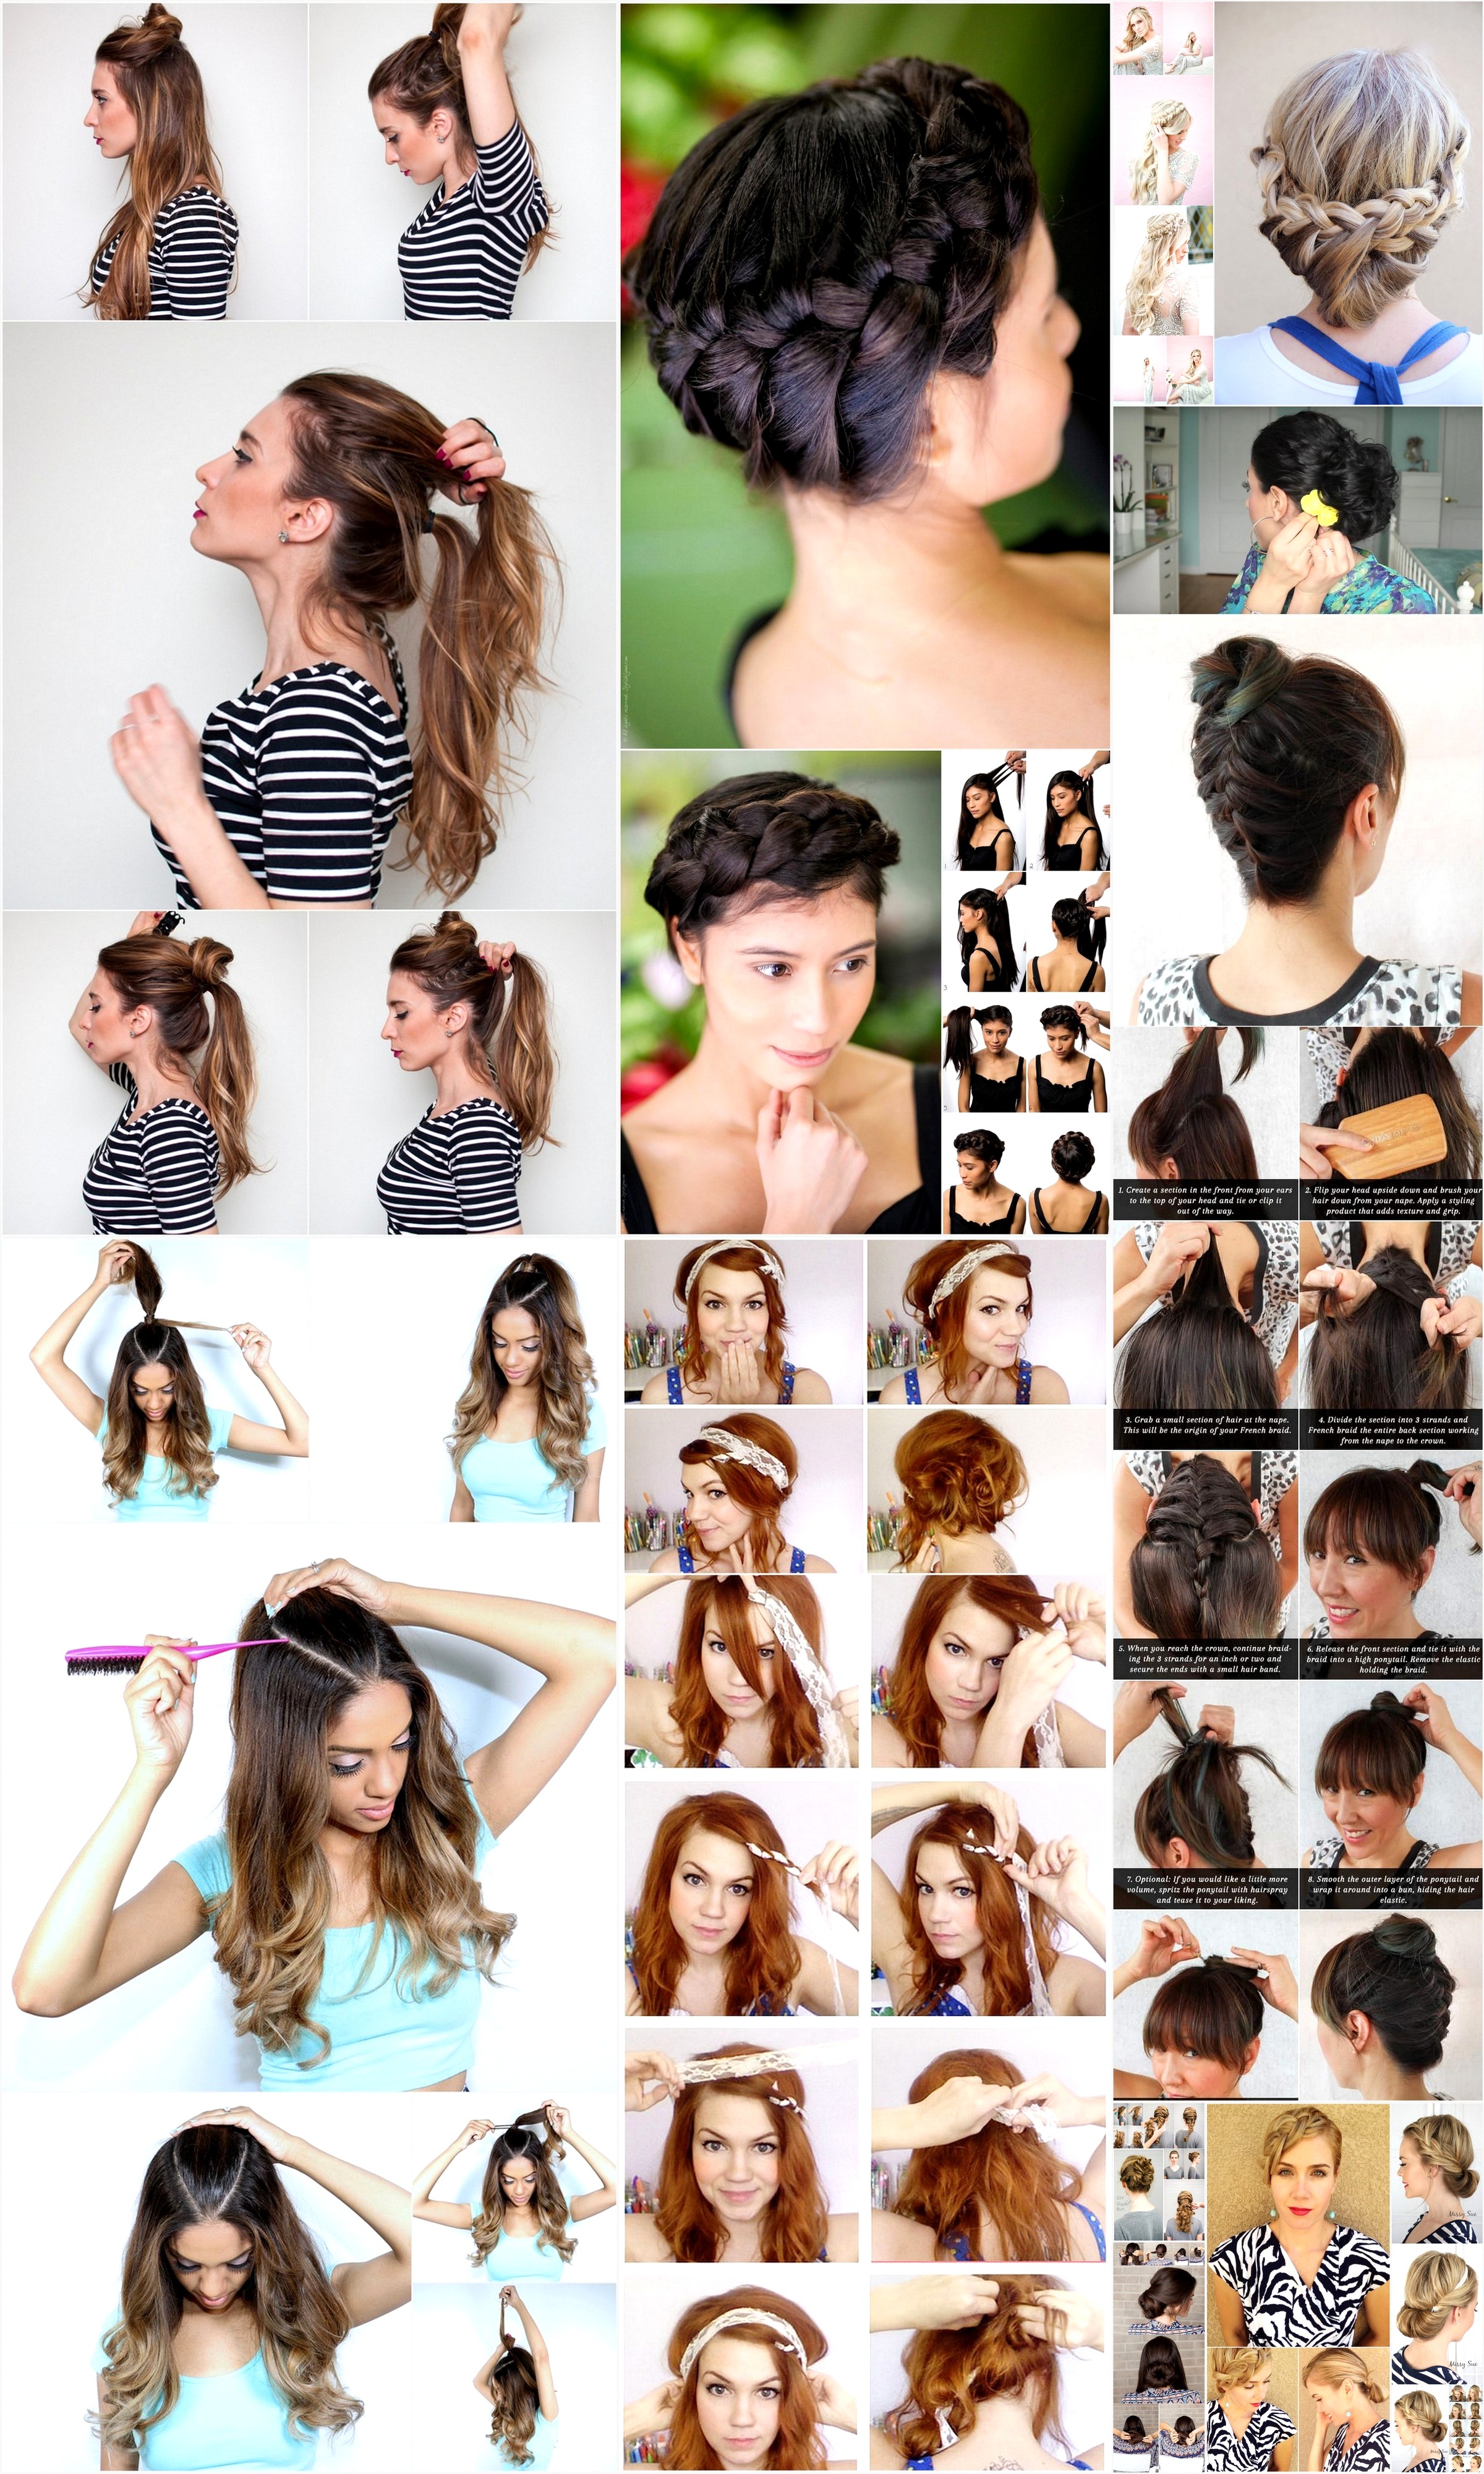 Top Cool & Easy DIY Hair Styles - How To Make DIY Inspirations